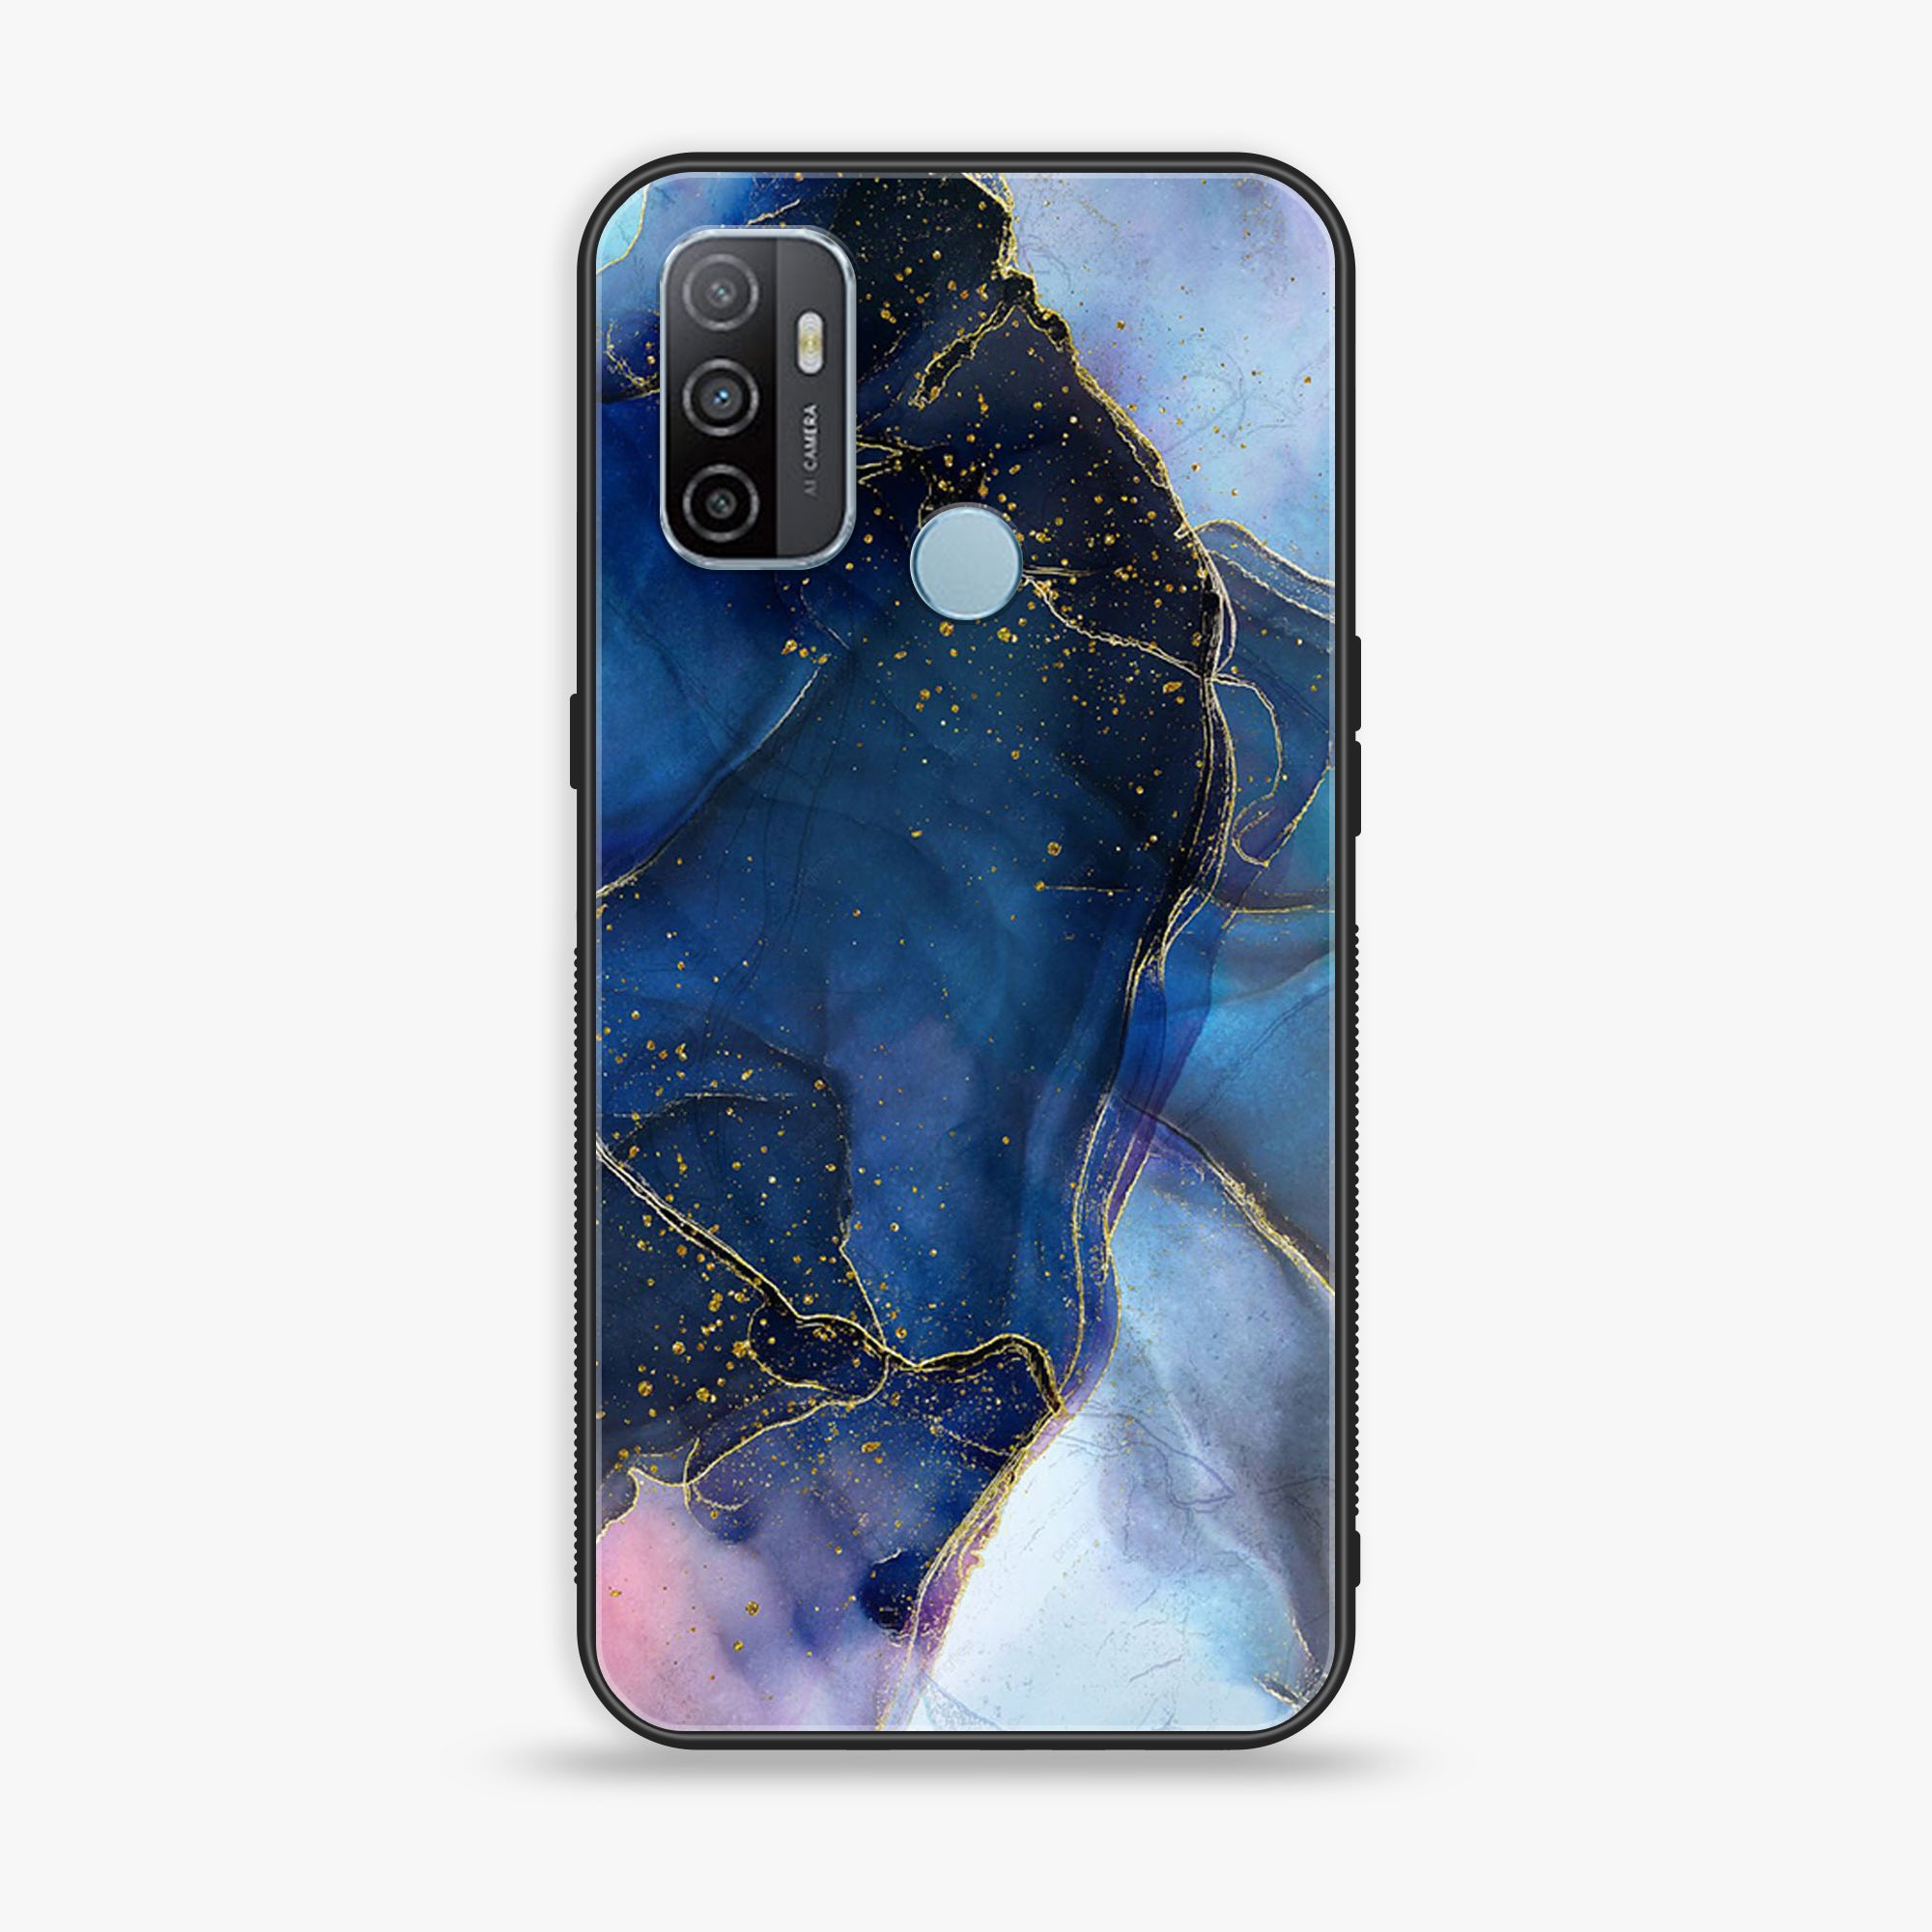 Oppo A53 - Blue  Marble Series - Premium Printed Glass soft Bumper shock Proof Case